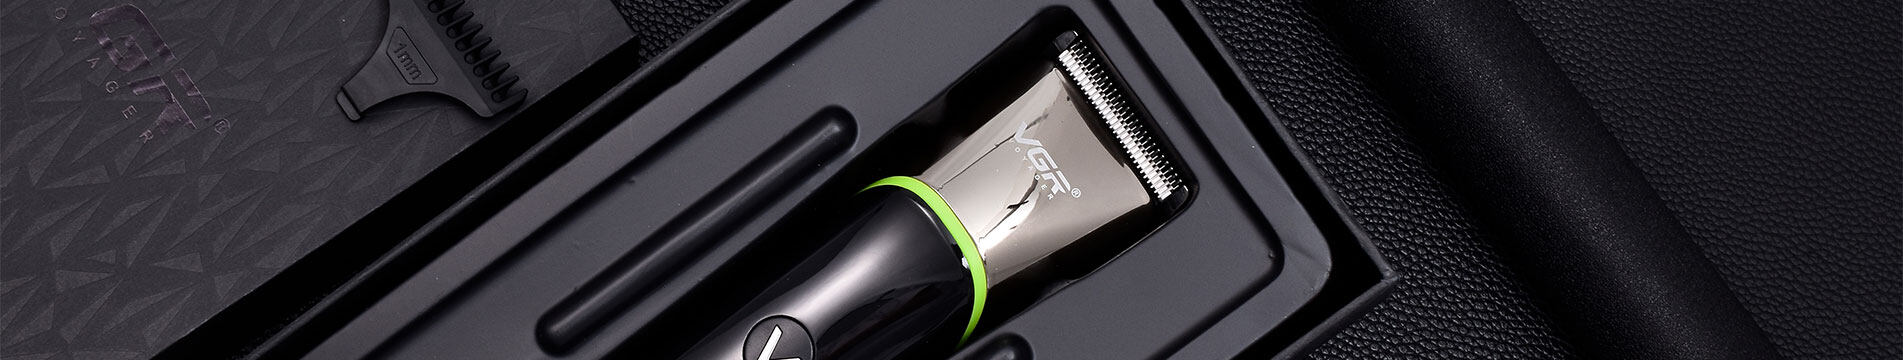 rechargeable hair trimmer manufacturers, china hair trimmer manufacturer, Wholesale Professional Hair Clipper Trimmer, China rechargeable hair trimmer factory, oem hair trimmer